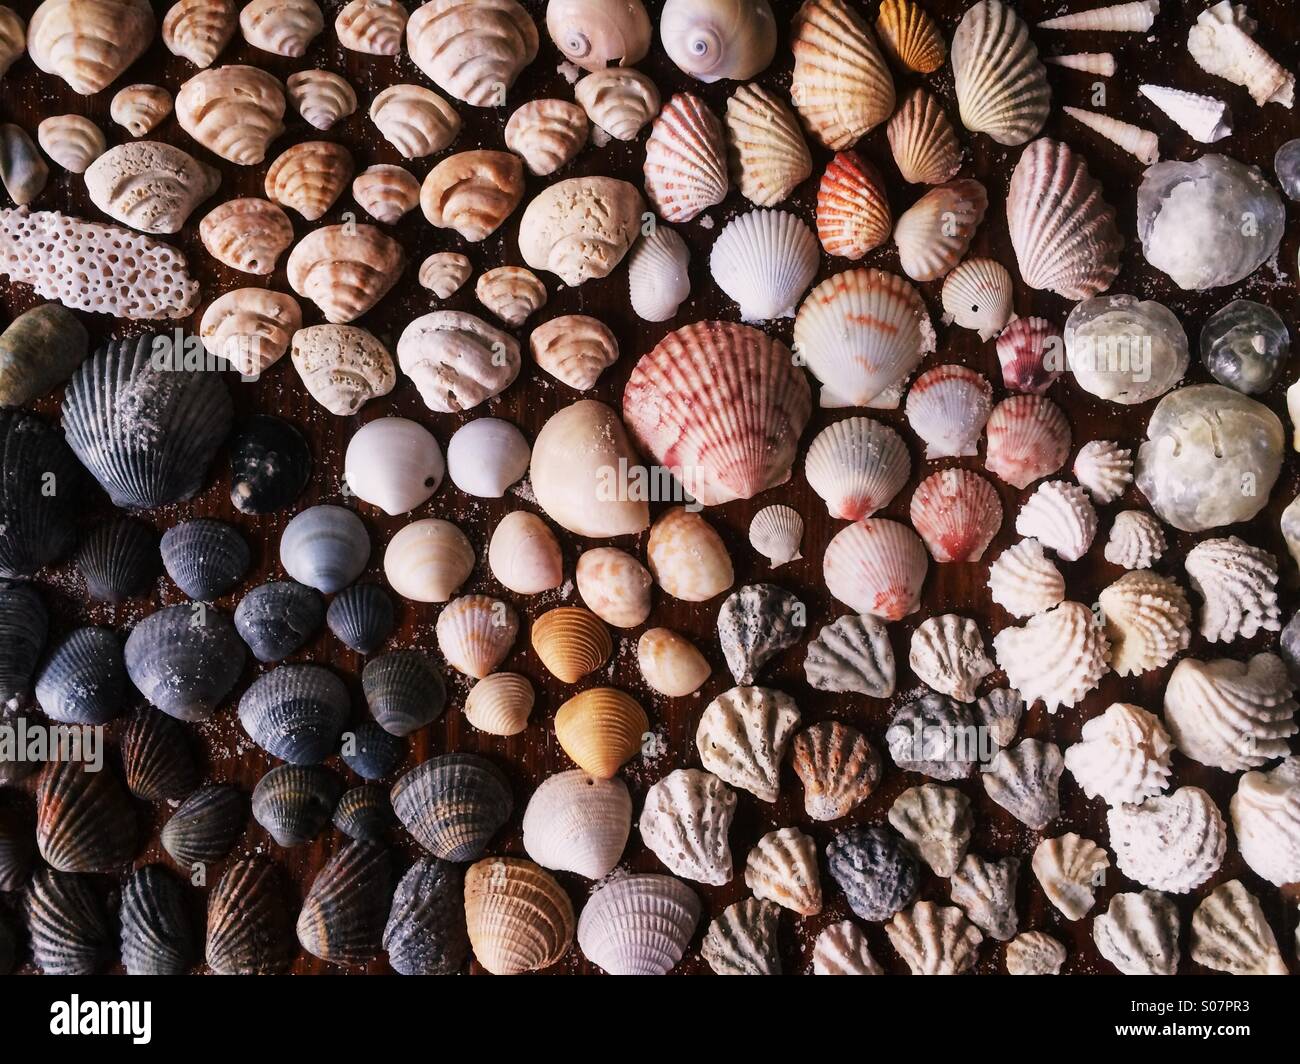 A beautiful collection of sea shells from the Gulf Coast of Florida, USA. Stock Photo